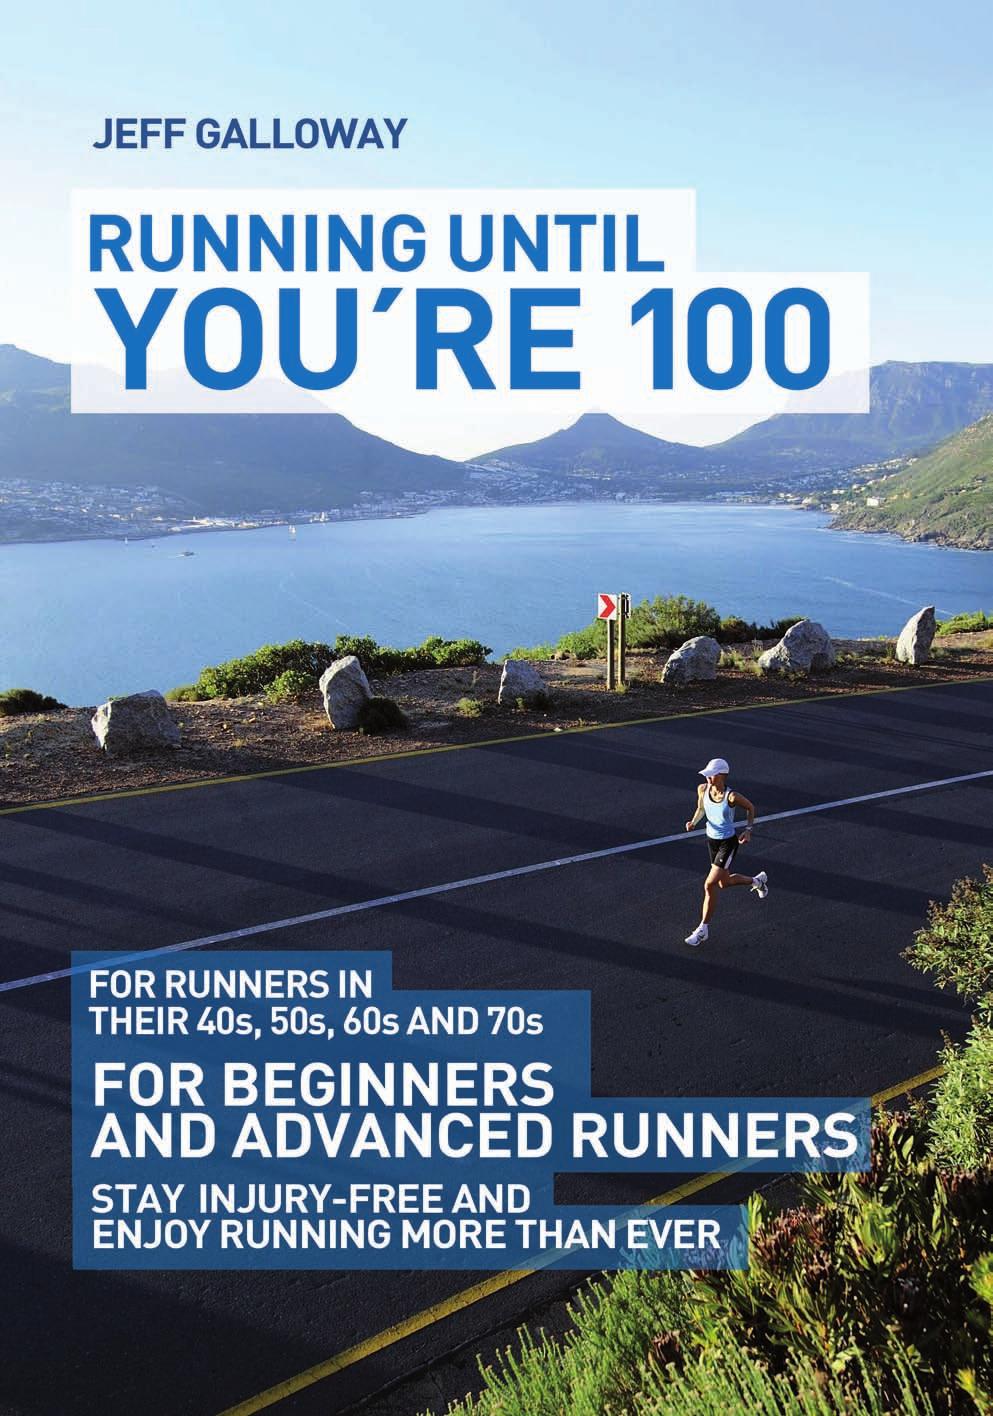 About the Book Olympian Jeff Galloway has worked with tens of thousands of runners in their 40s, 50s, 60s and 70s.